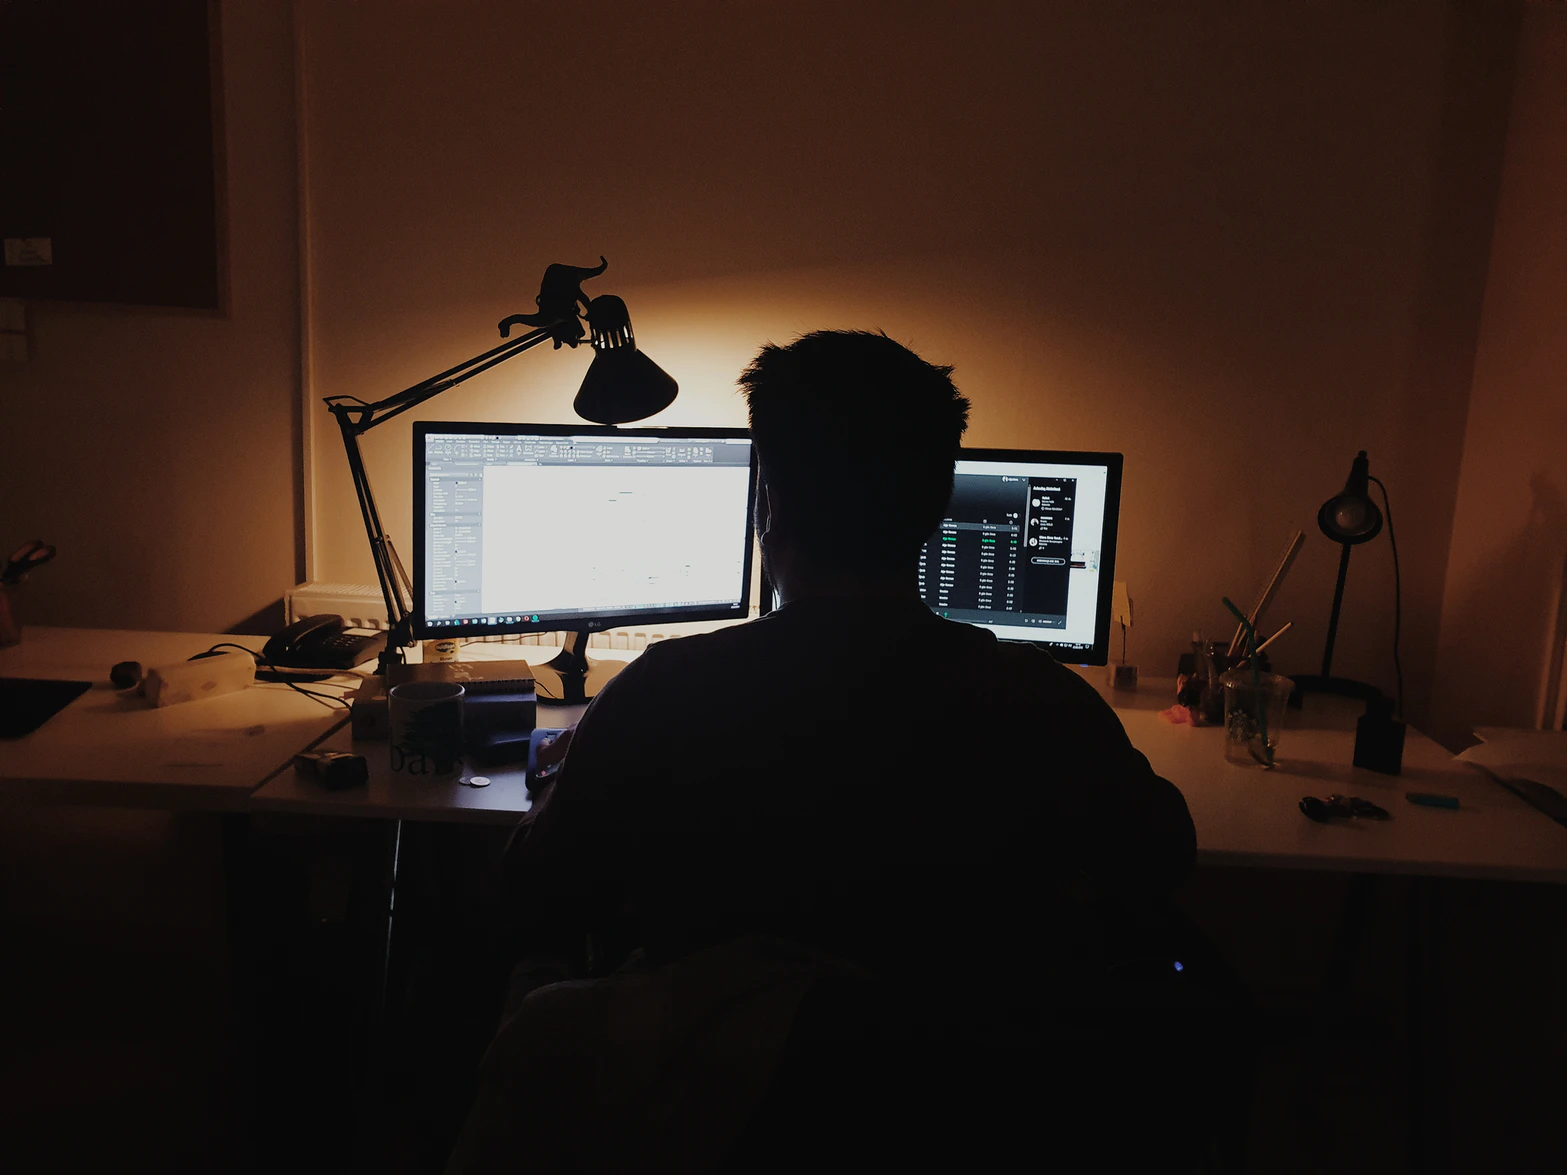 An image of a man sitting alone in a dark room, facing two computer screens.